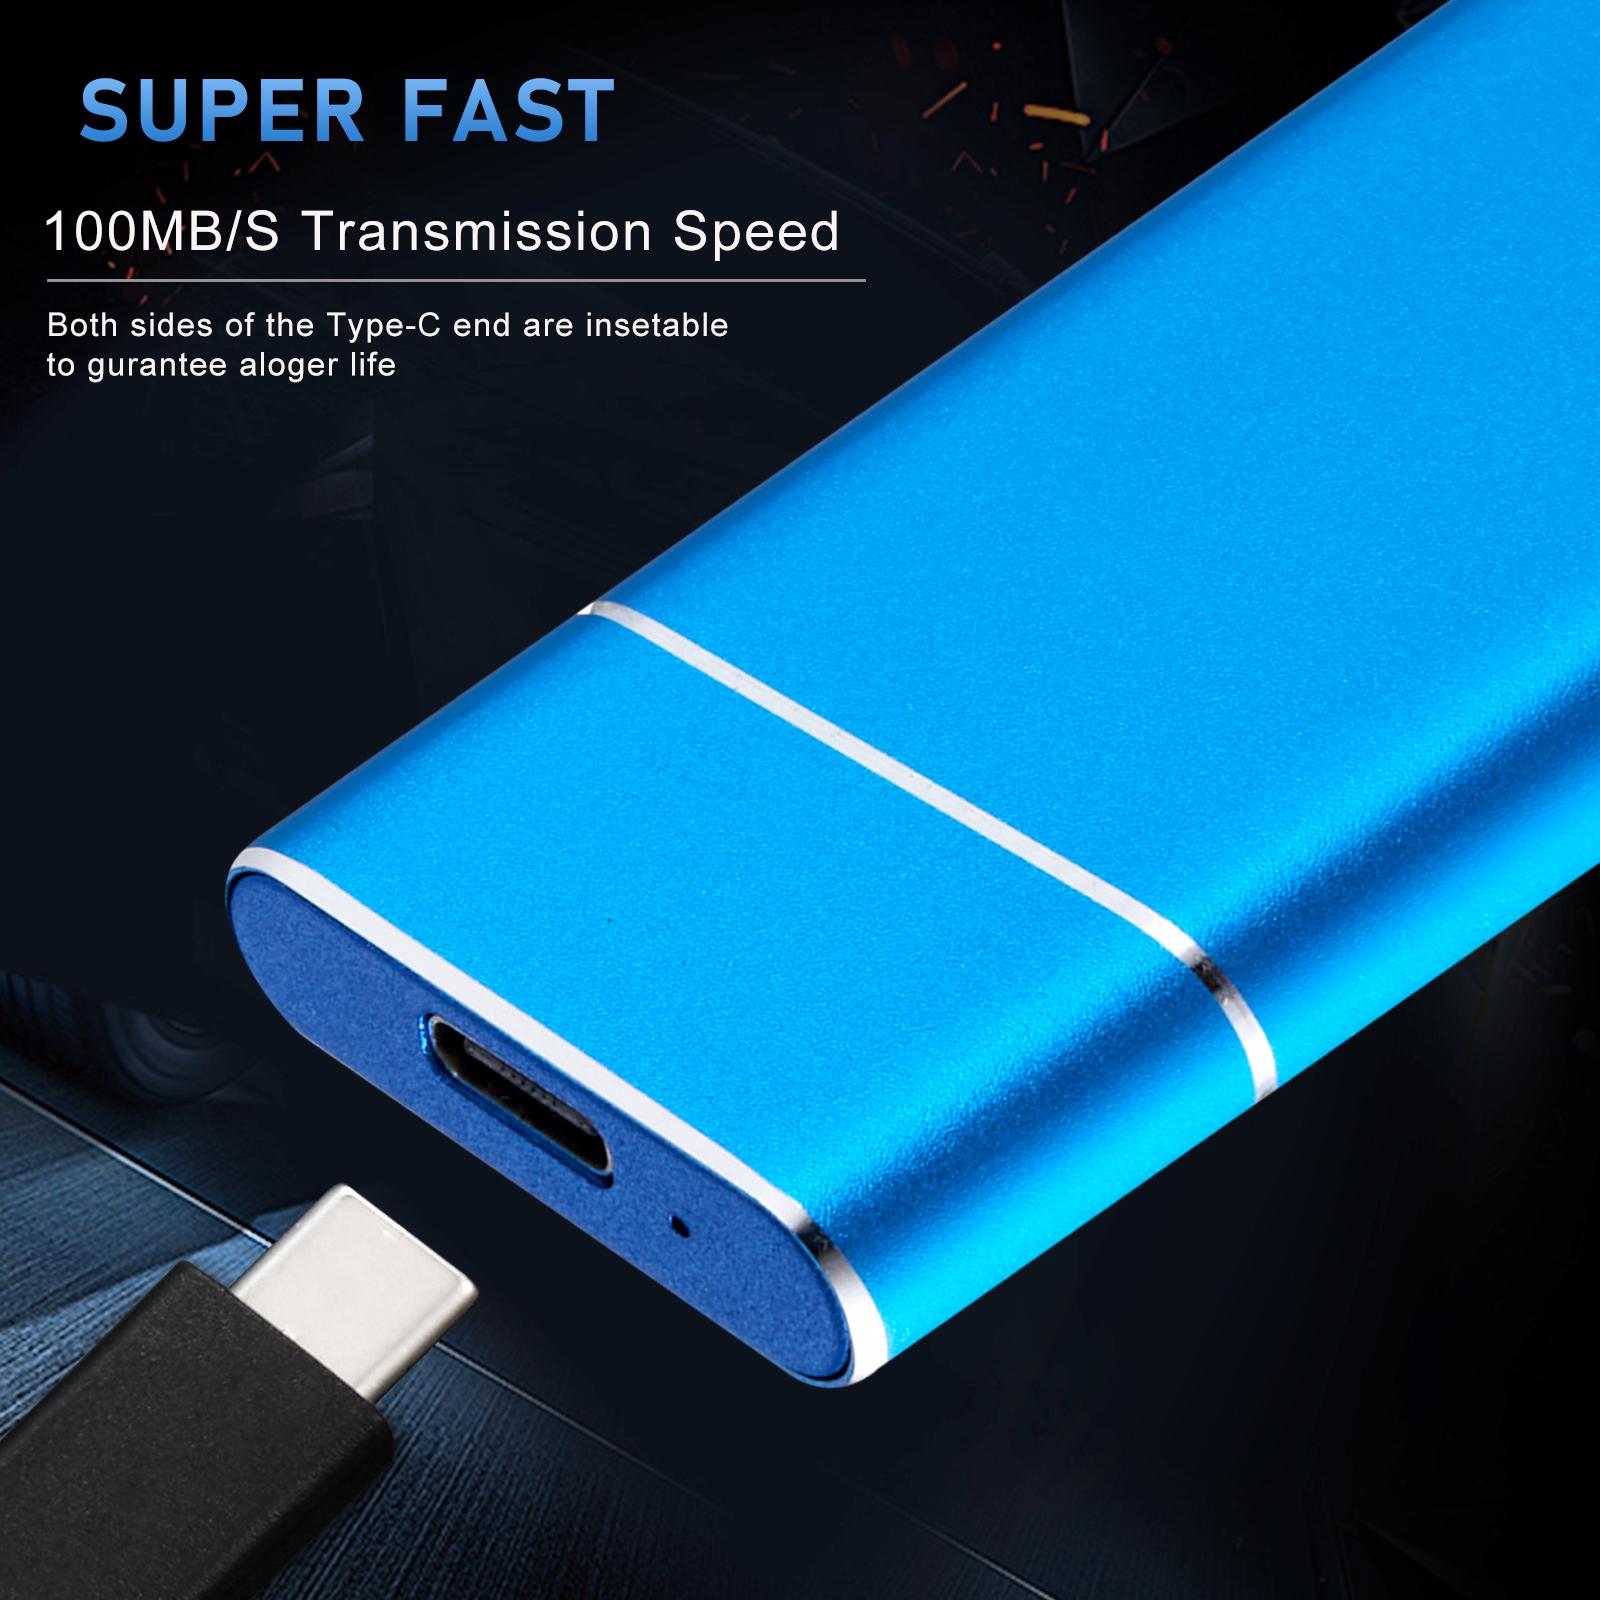 Portable USB 3.1 SSD 430MB/s Read Speed Solid State Drive Blue 2TB